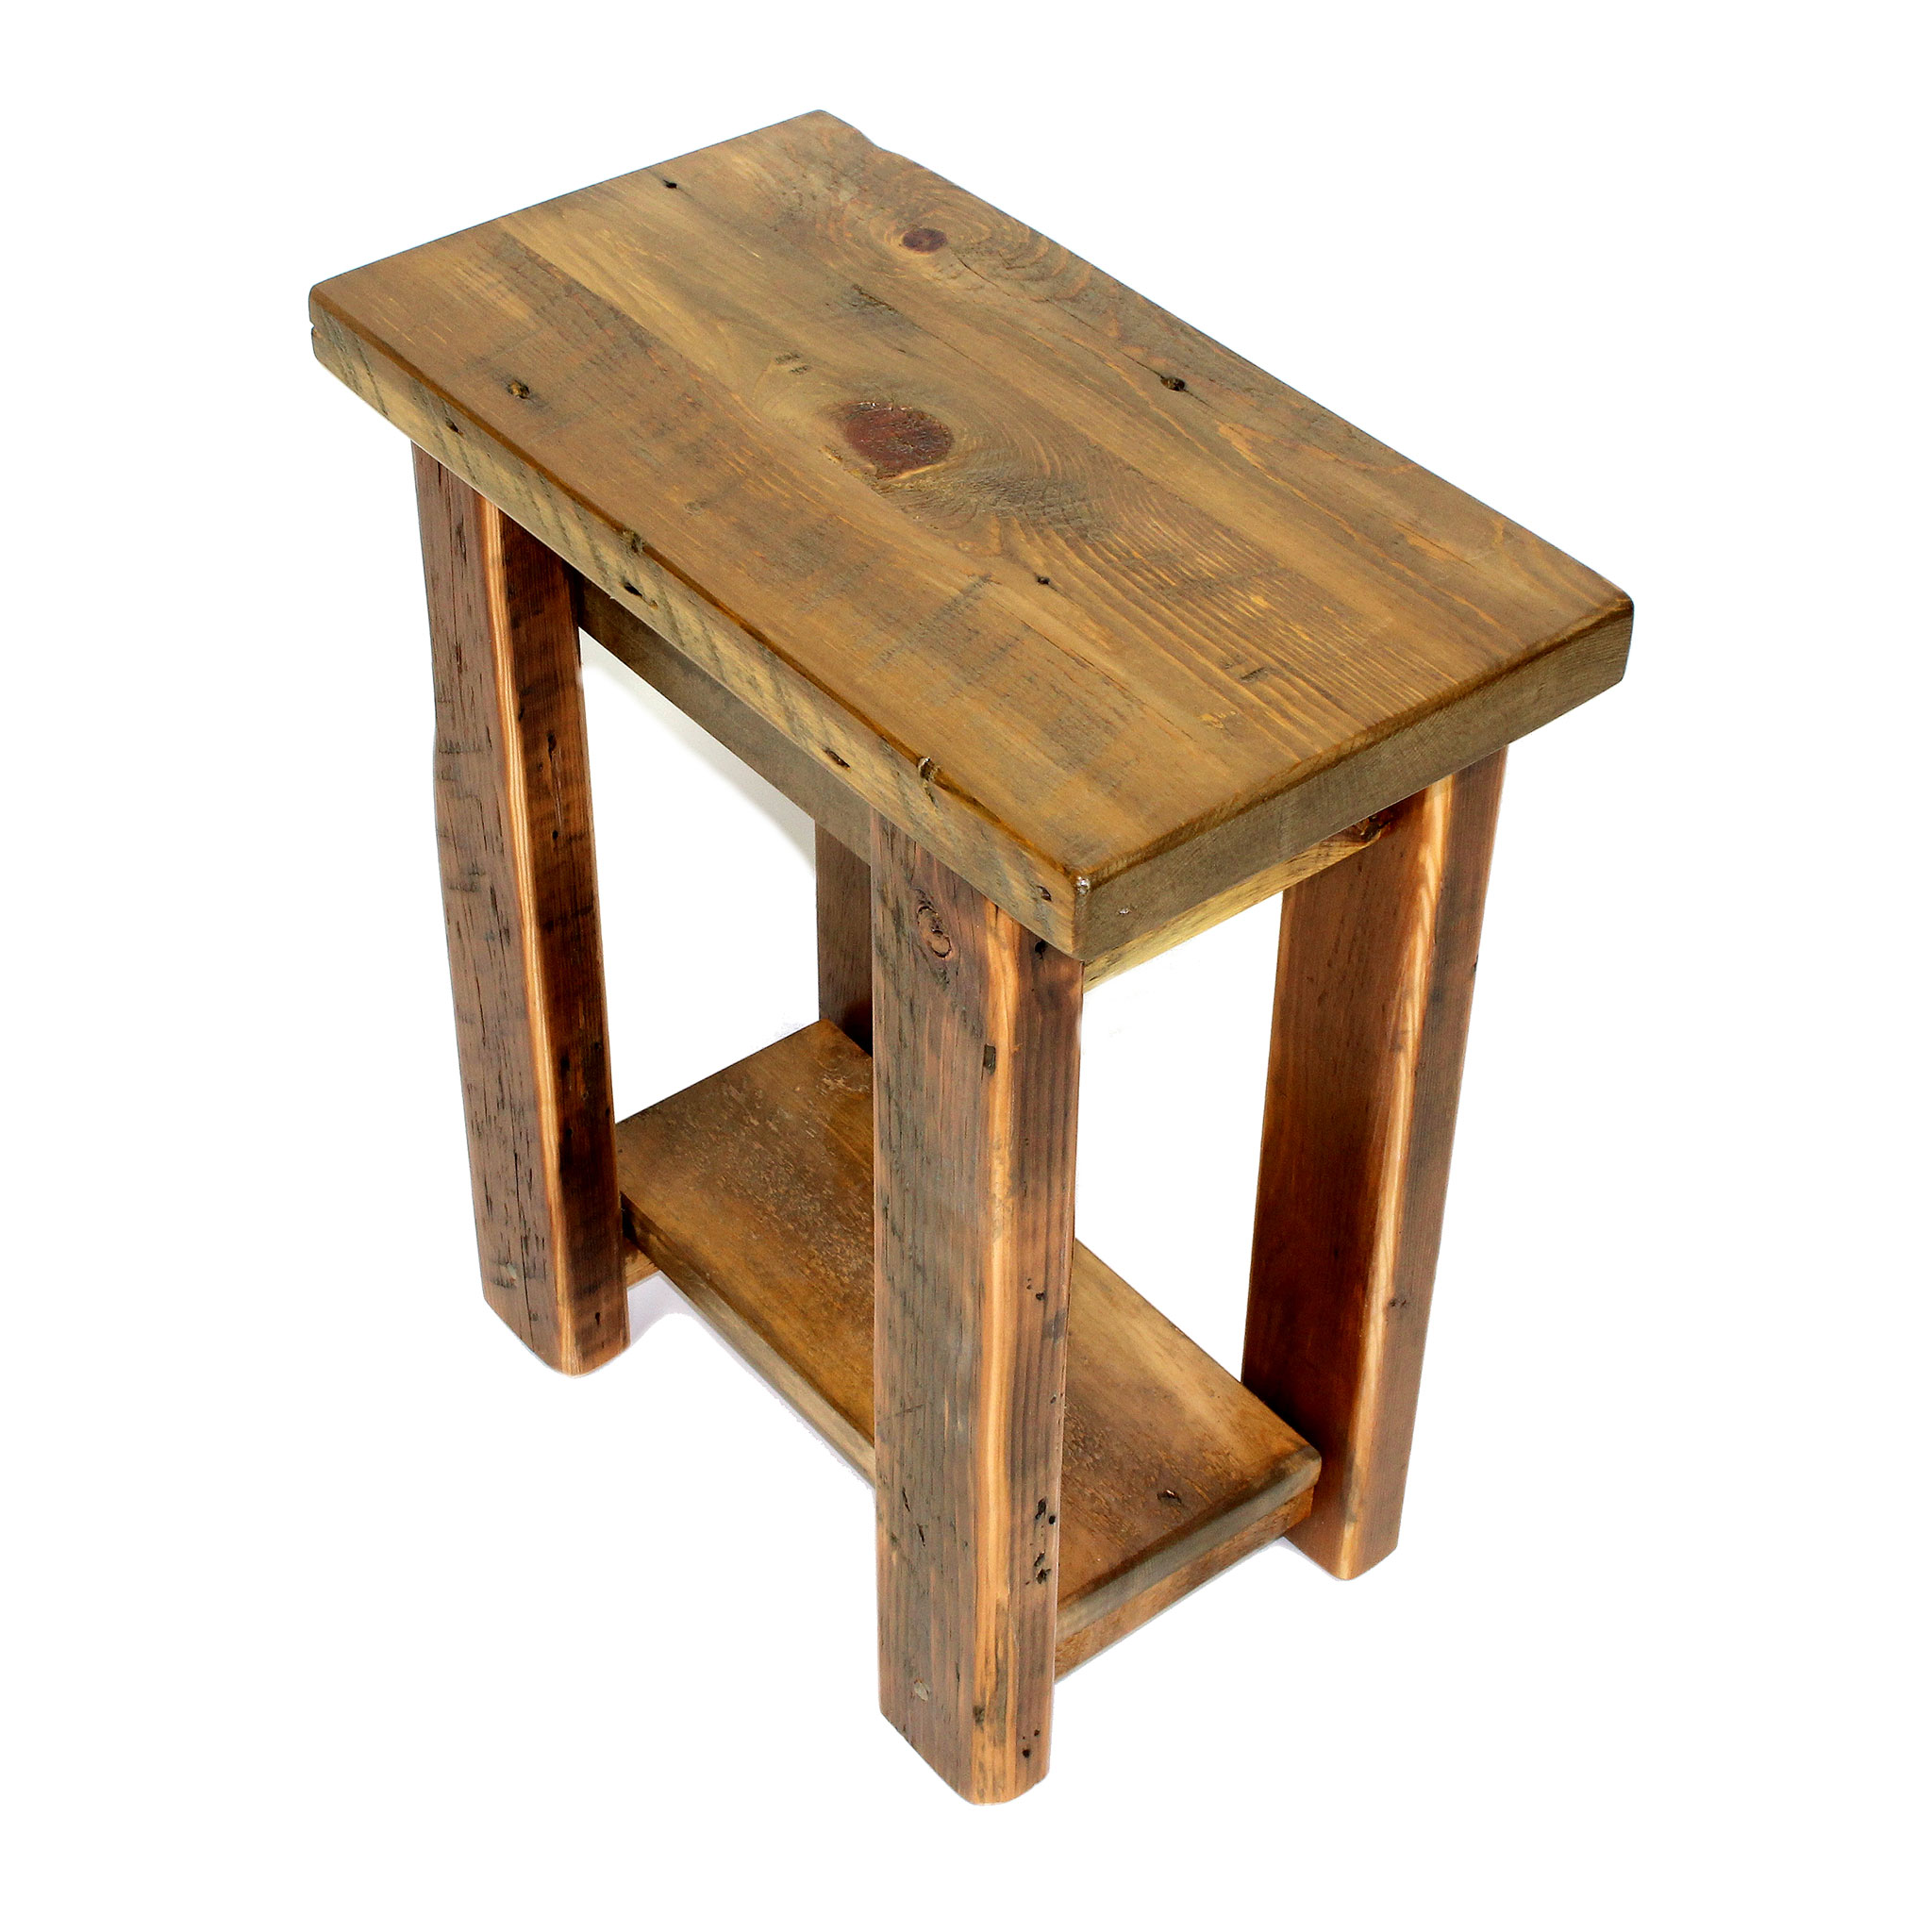 Small Reclaimed Wood End Table Four, Reclaimed Wood End Table With Drawer